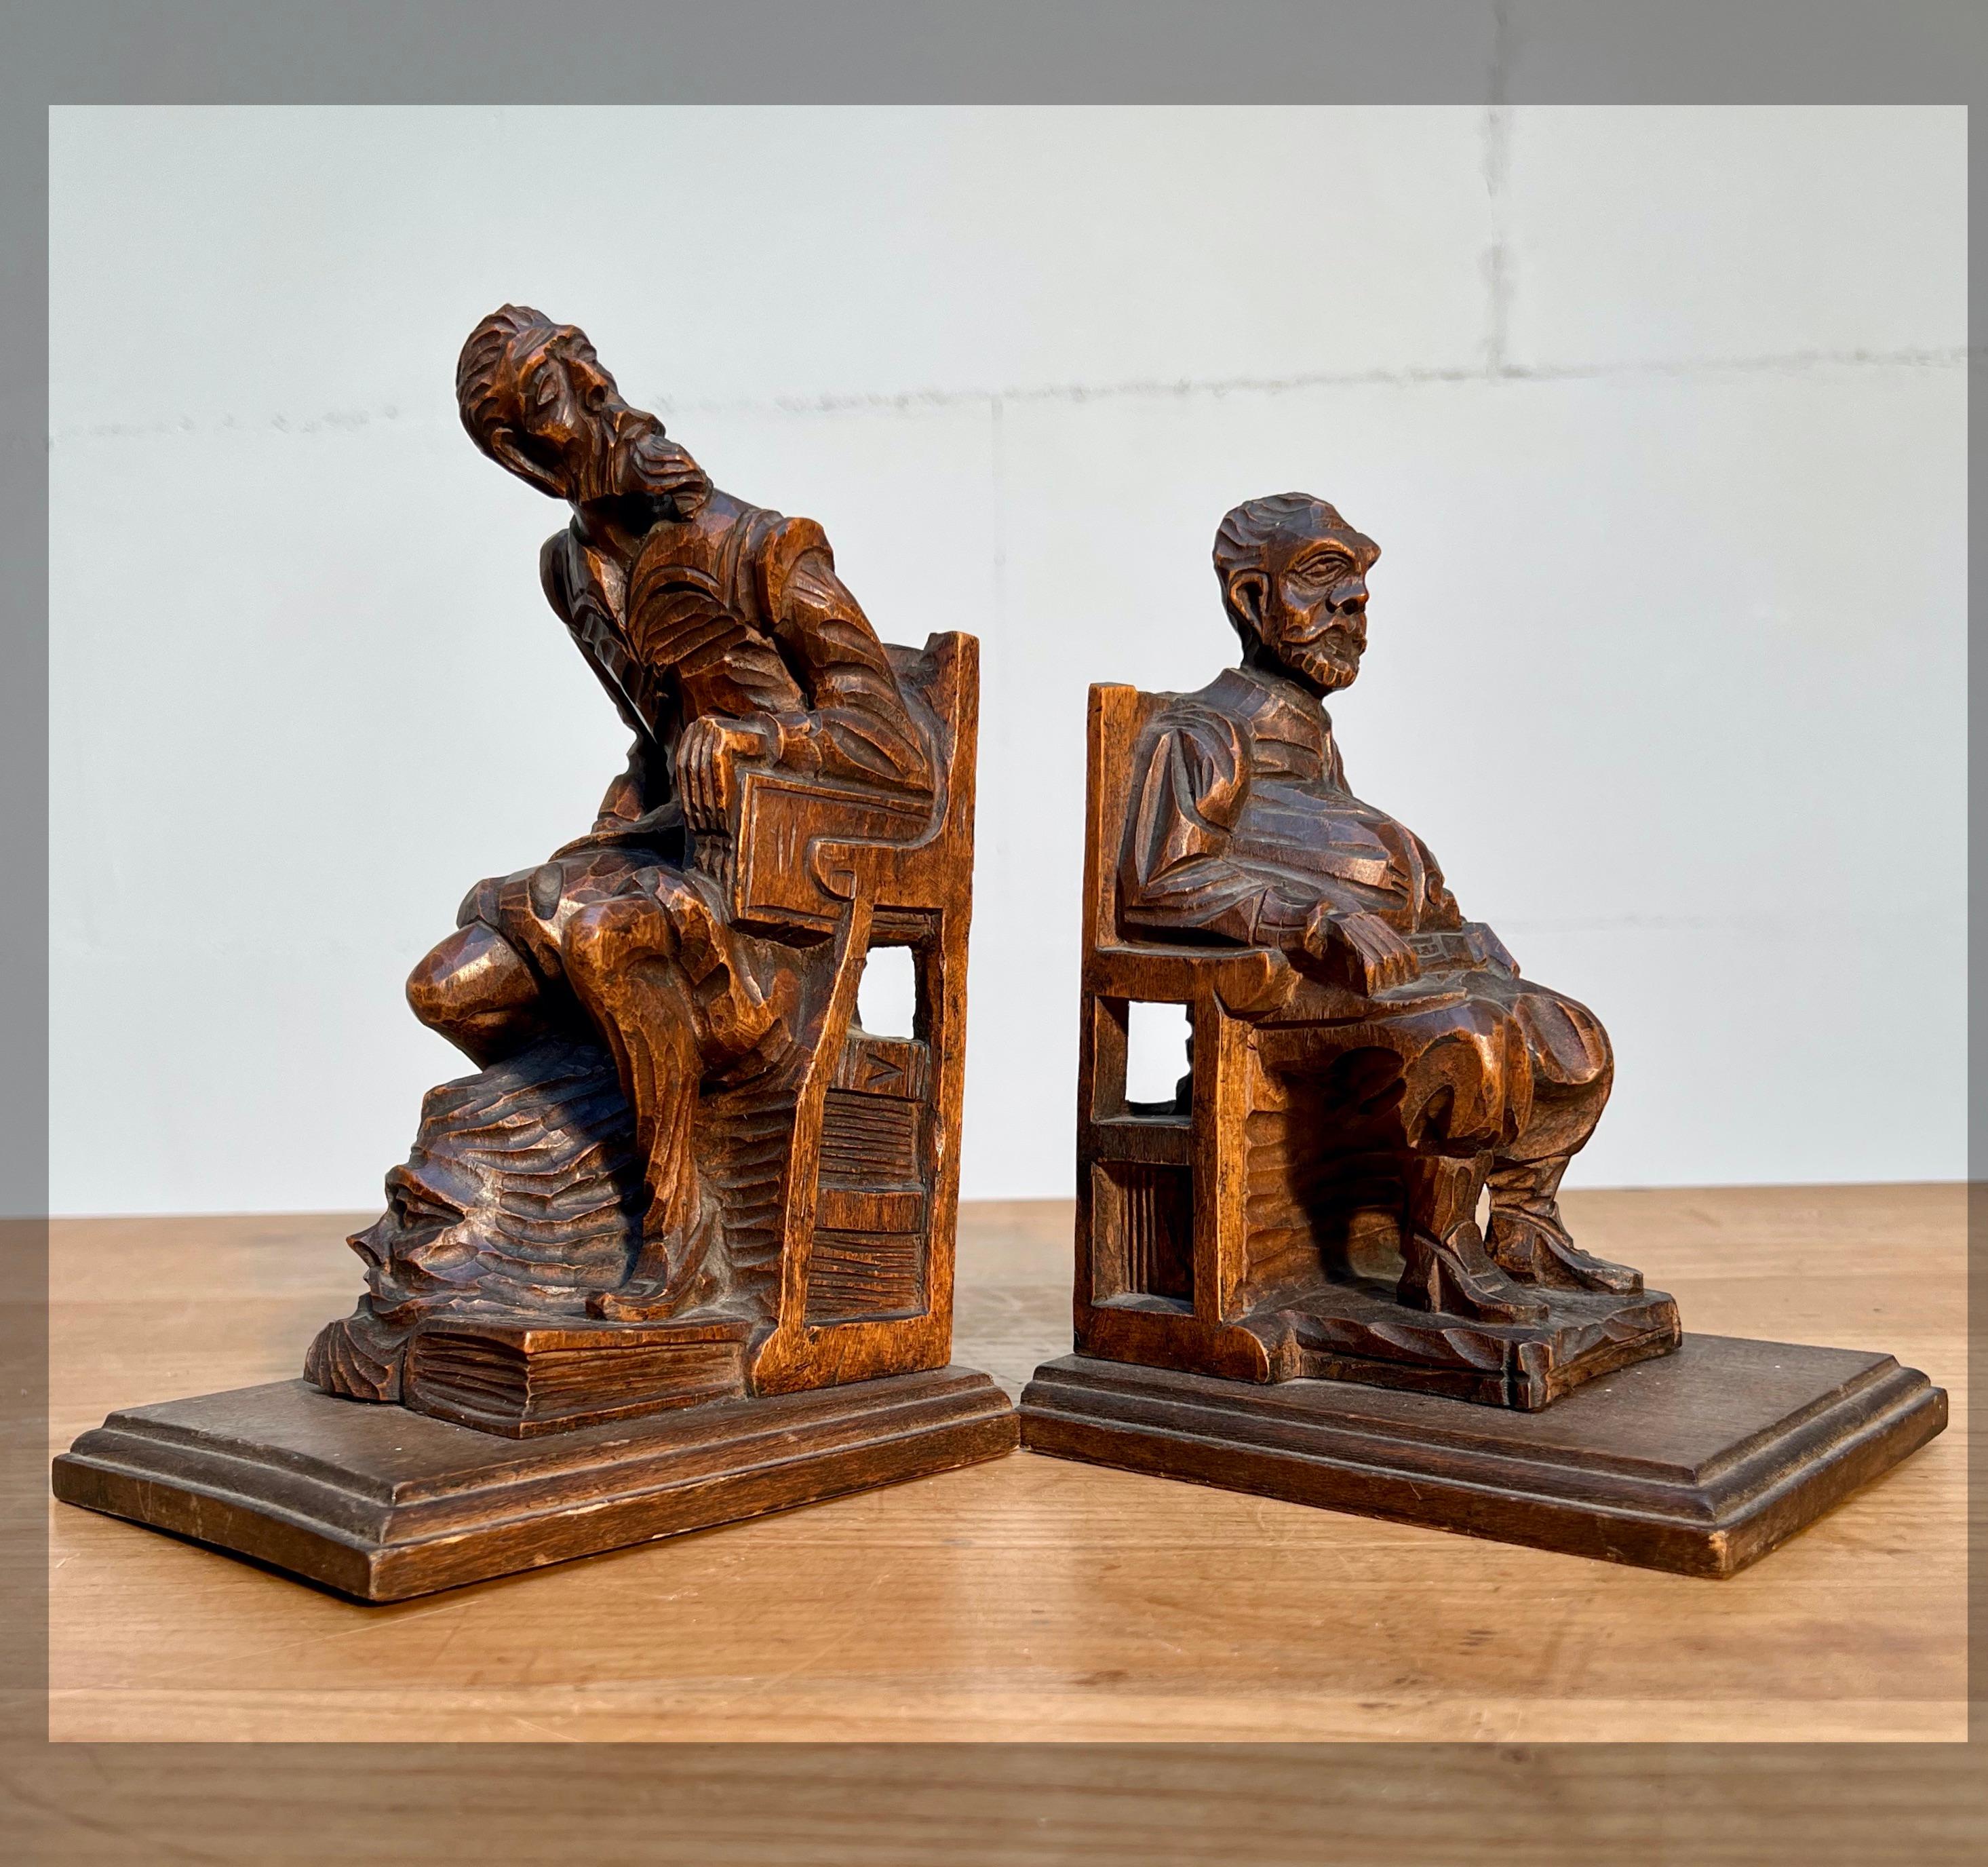 Finest quality carved and mint condition 1930s, famous novel bookends.

If you are looking for decorative, practical and very well-crafted bookends then this detailed pair could be perfect for you. The taller and slimmer figure obviously is Don